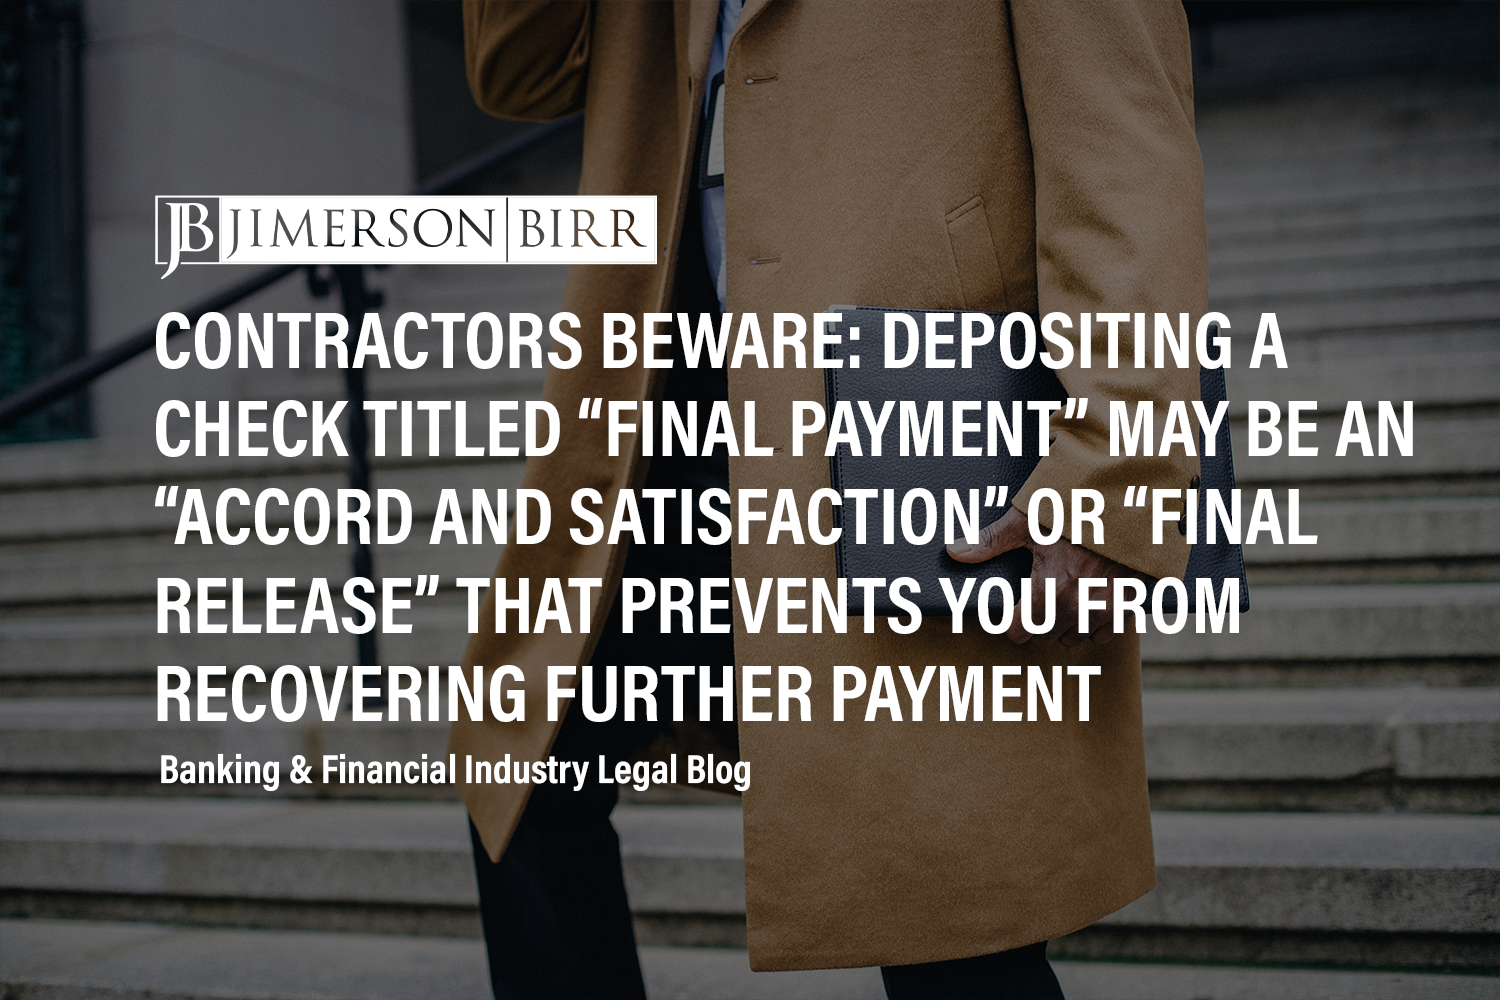 Contractors Beware: Depositing a Check Titled “Final Payment” May Be an “Accord and Satisfaction” or “Final Release” That Prevents You From Recovering Further Payment